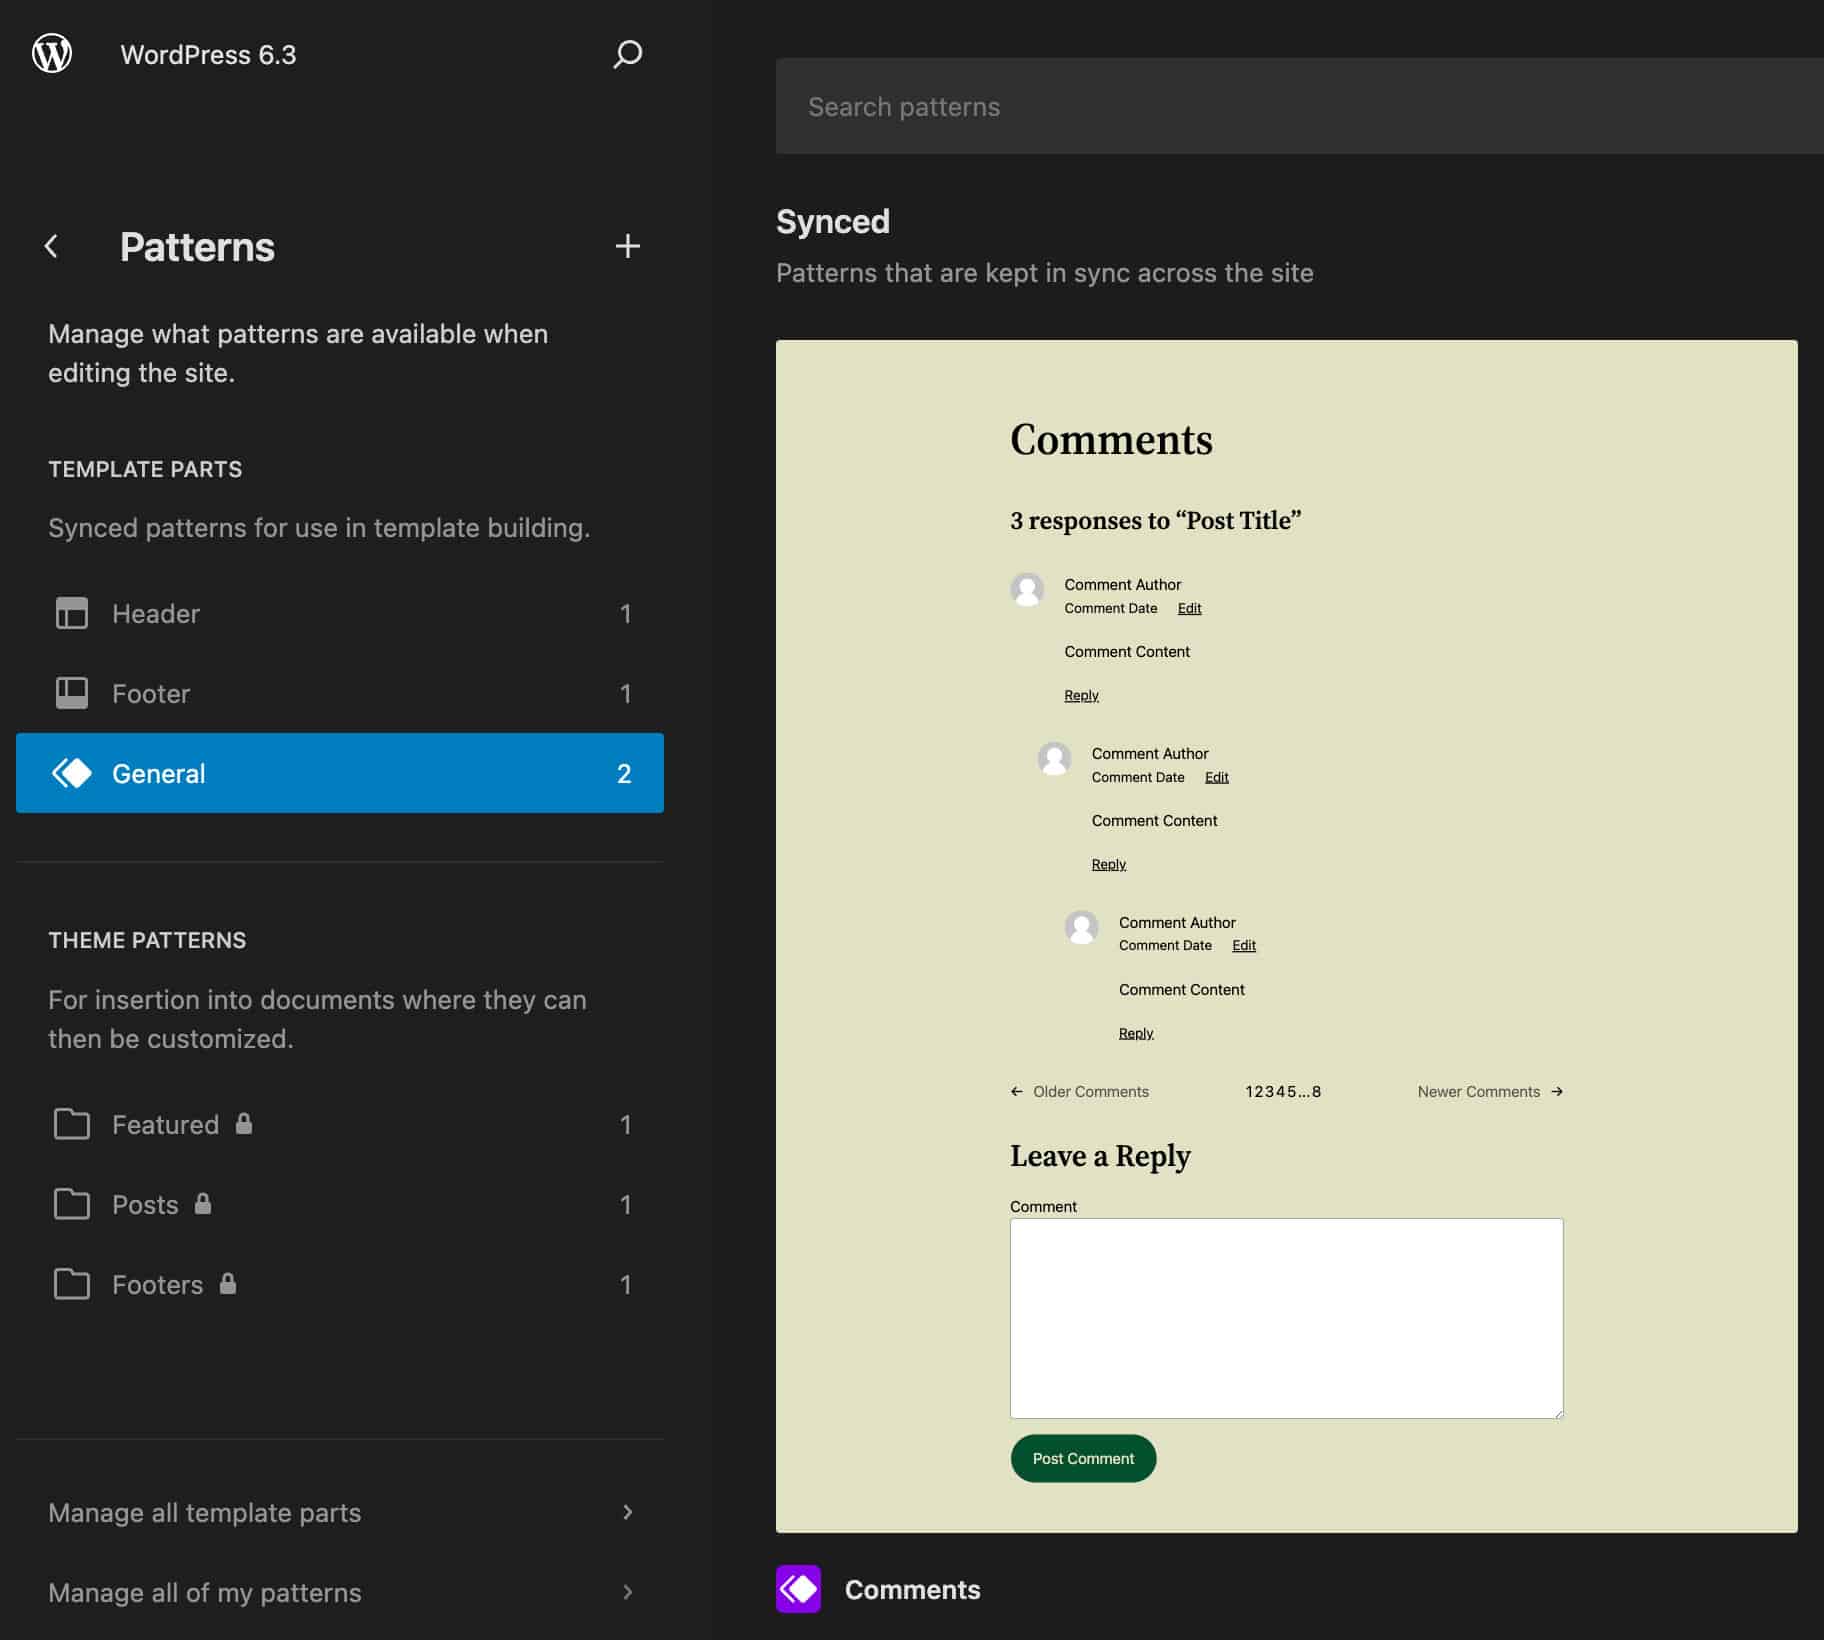 Template Parts and Theme Patterns in the new Patterns section of the Site Editor